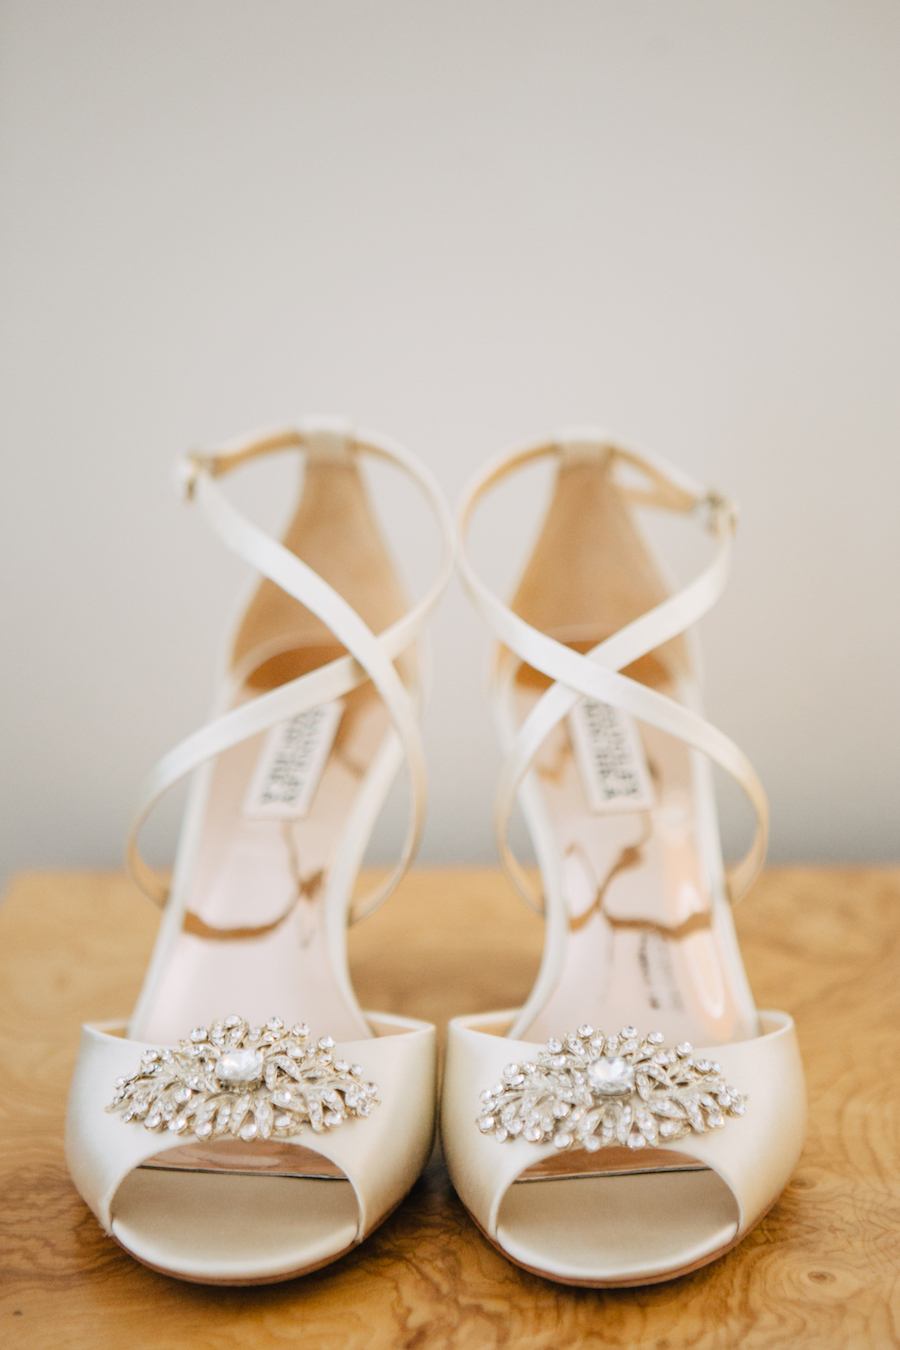 ROQUE Events - Amber and Vince - Courtney Lindberg Photography - Napa Valley Wedding5.JPG